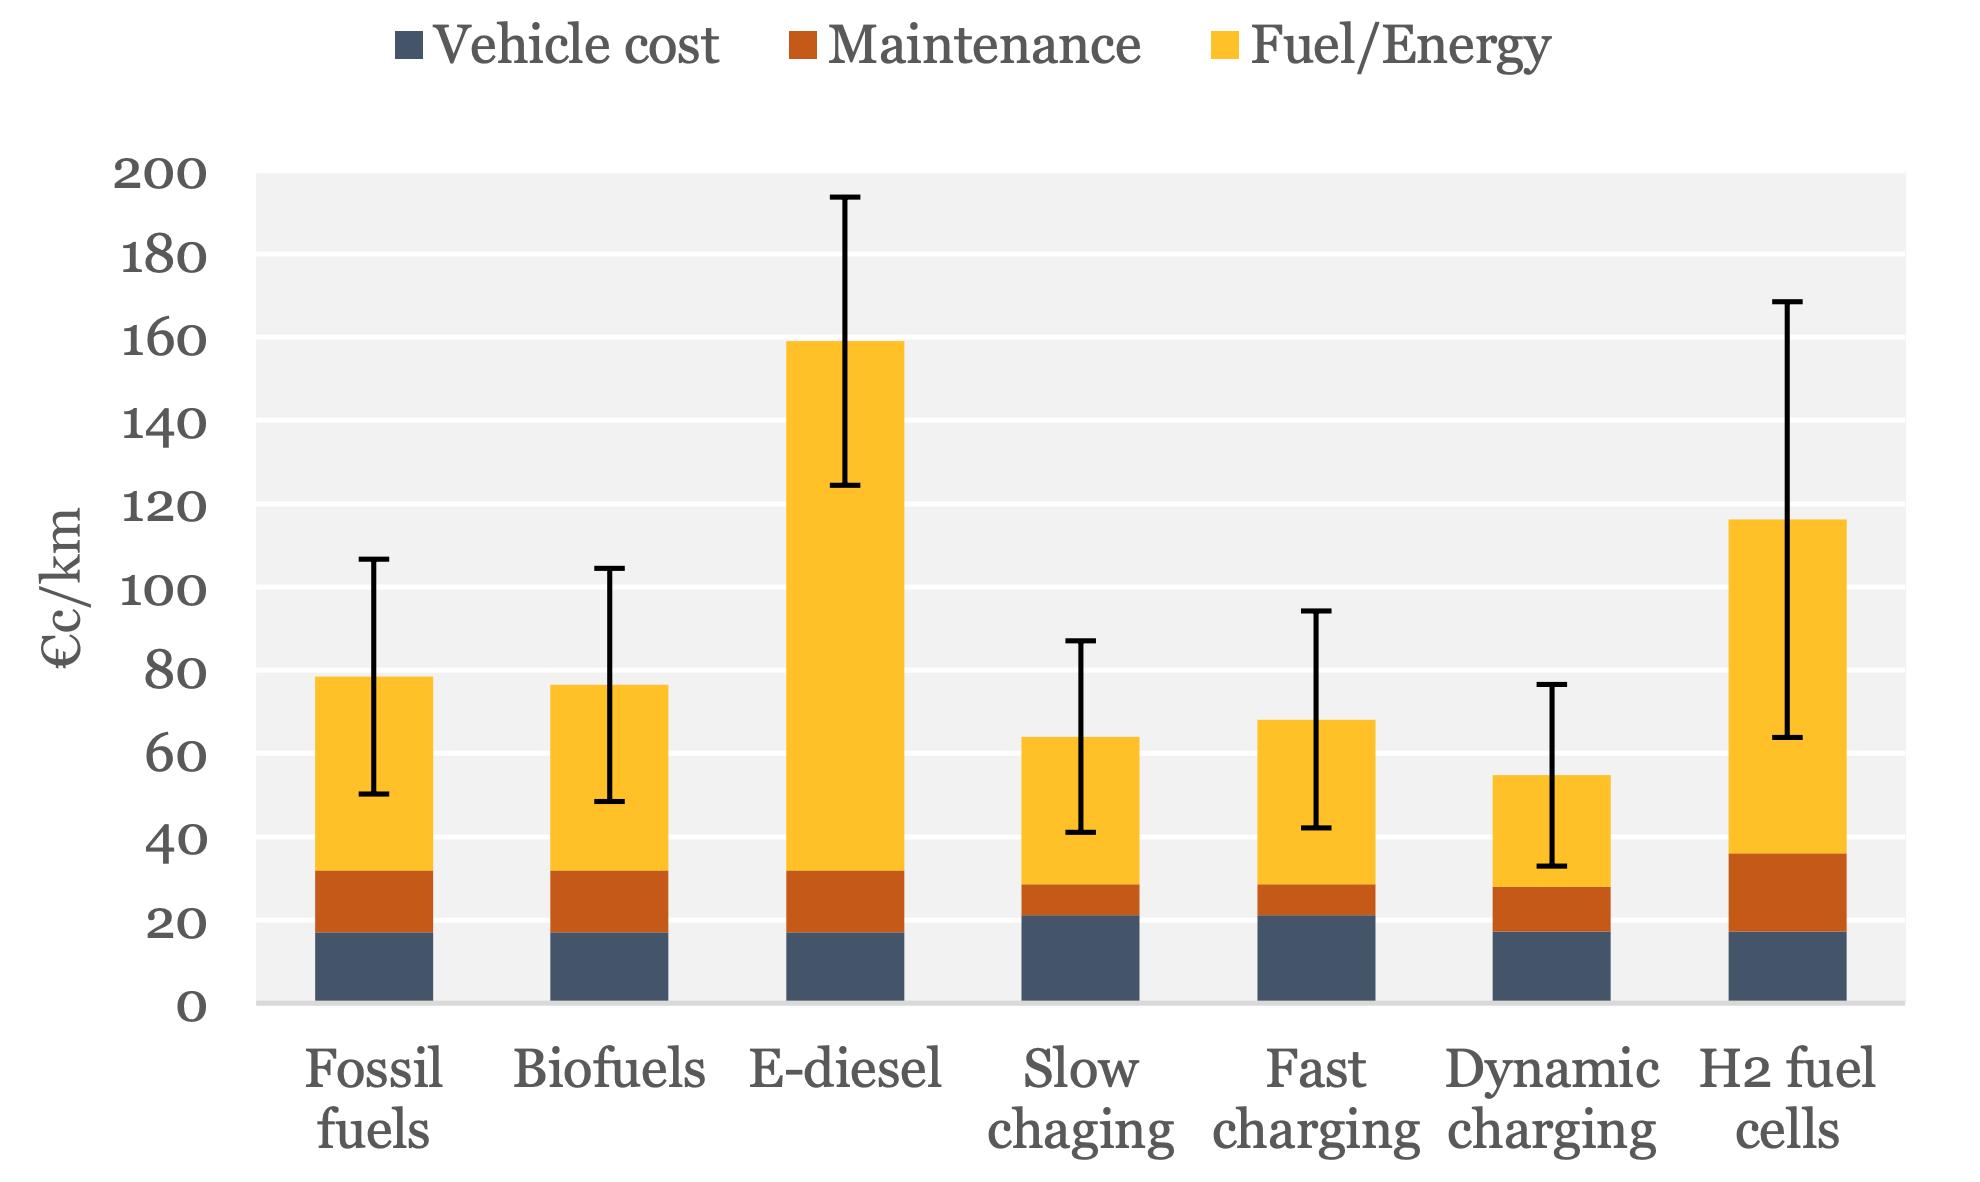 New European Heavy Freight Decarbonization Study Is Much Better Than Most - CleanTechnica